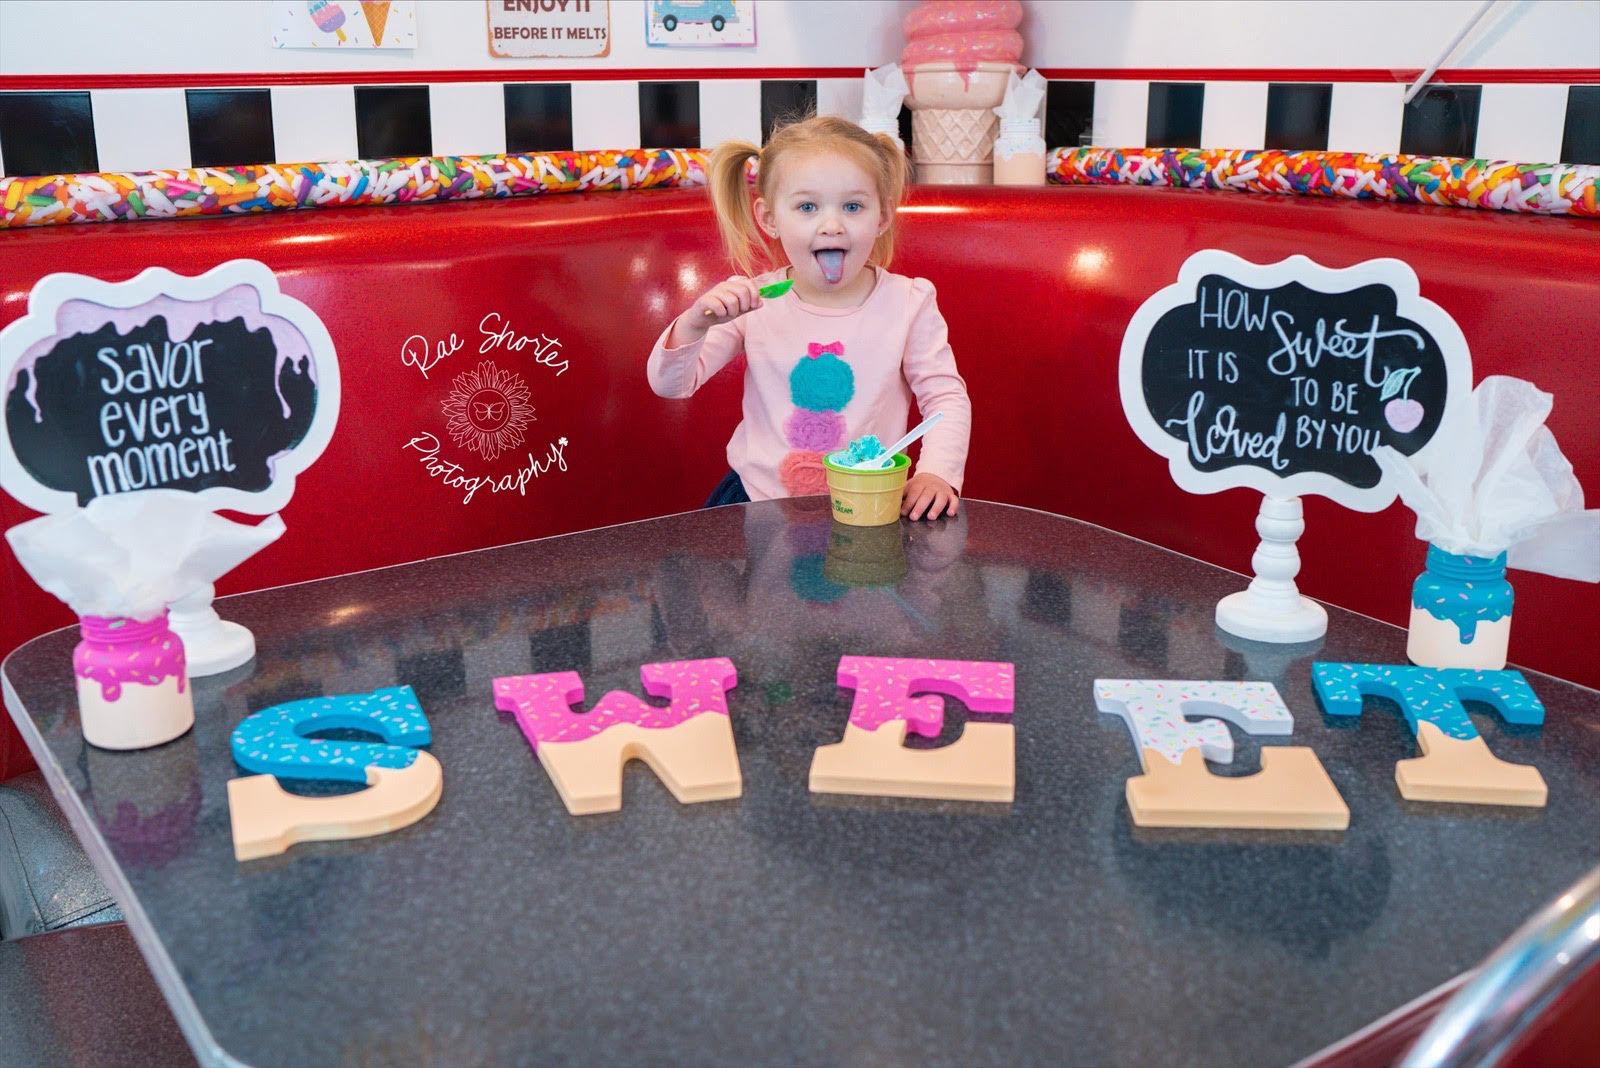 A girl poses in a both of an ice cream parlor with the letters that spell "Sweet" laid out on the table in front of her. Signs that say "Savor evey moment" and "How sweet it is to be loved by you" are next to her.